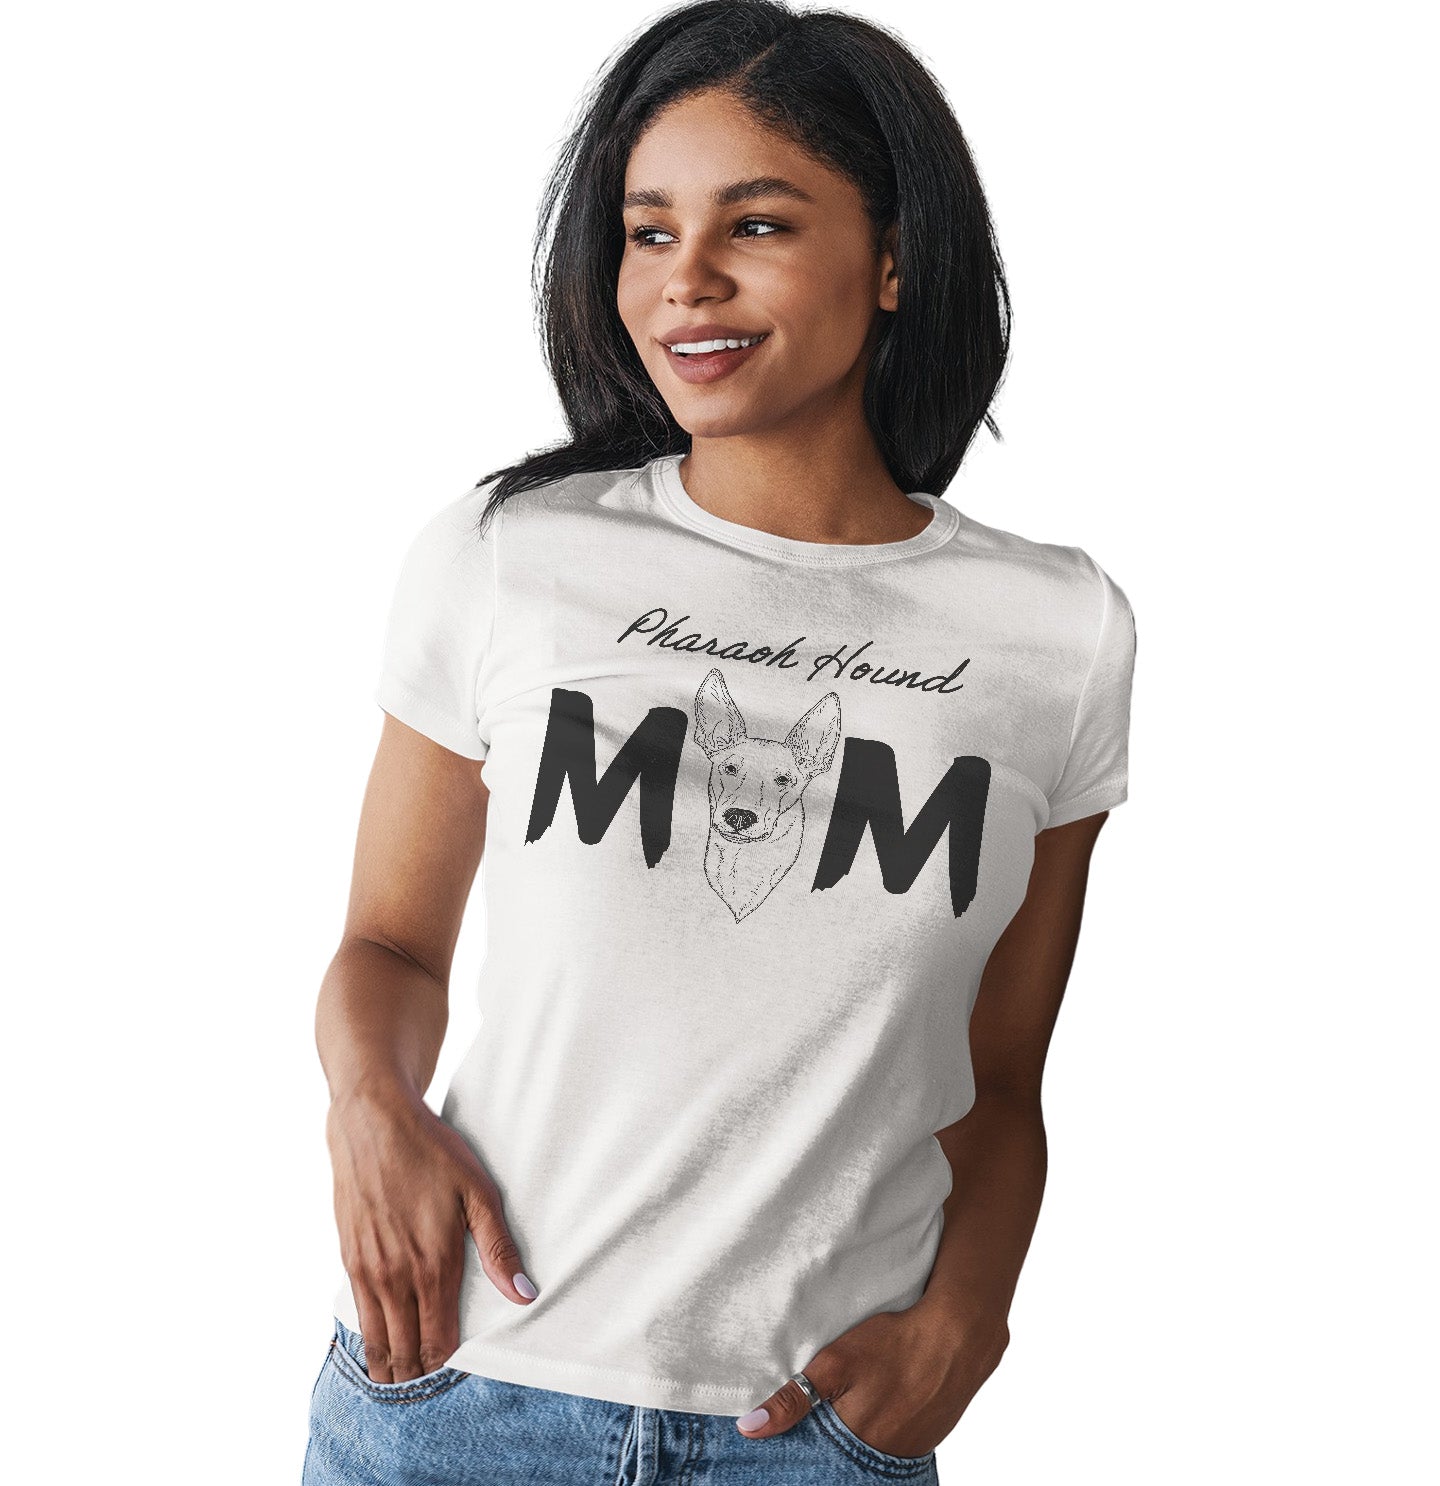 Pharaoh Hound Breed Mom - Women's Fitted T-Shirt